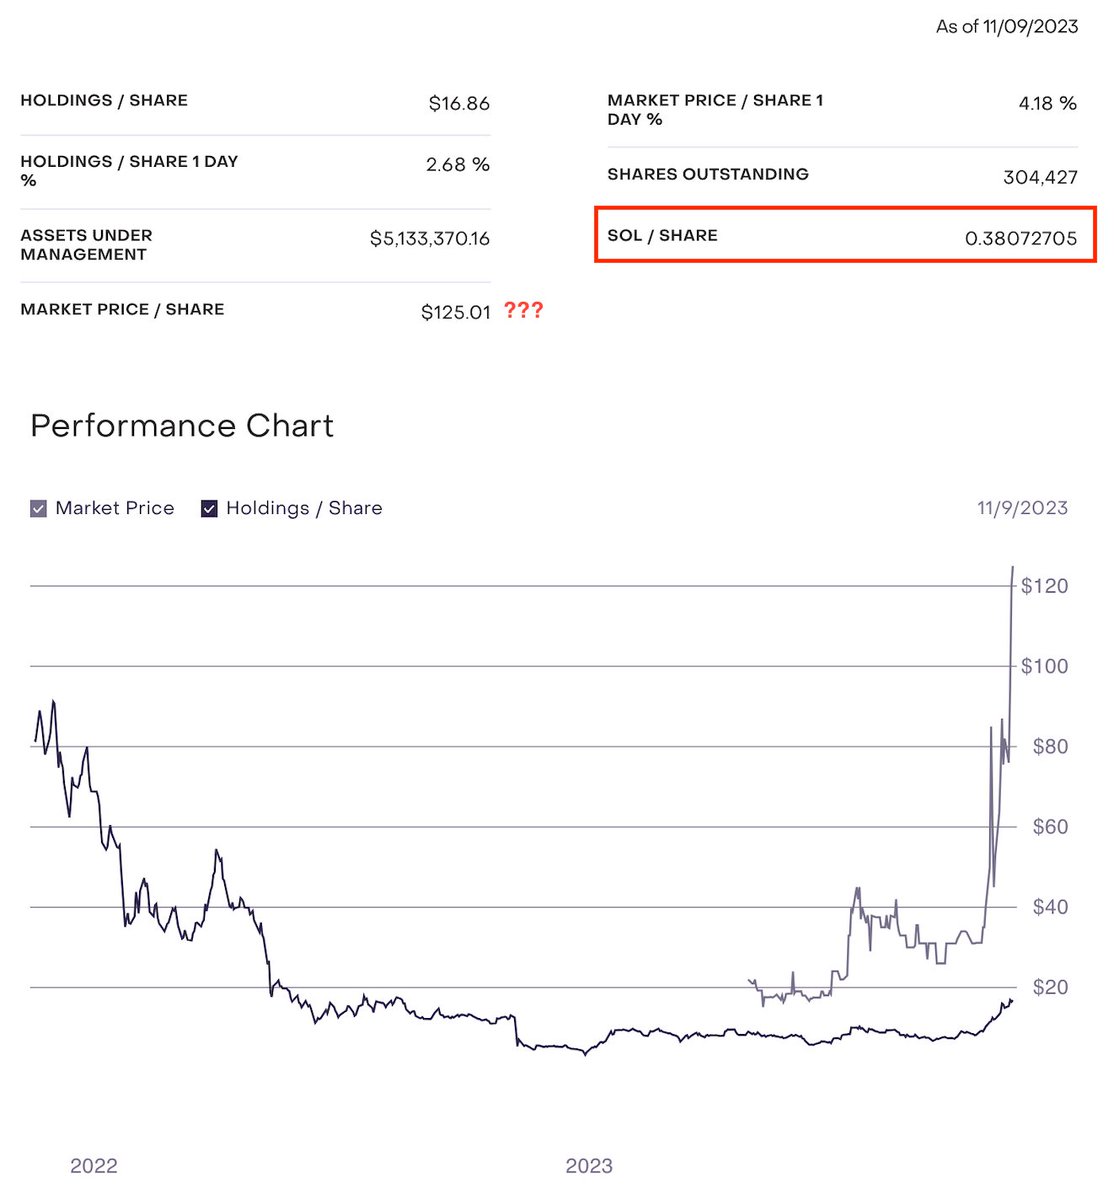 Ok so...

- Greyscale SOL fund is trading at $125 a share
- Each share holds 0.38 SOL
- Implies $SOL is at $328 per token
- 600% premium to NAV (using $55)

What the fuck? 

Solana is literally going to the moon holy shit lol